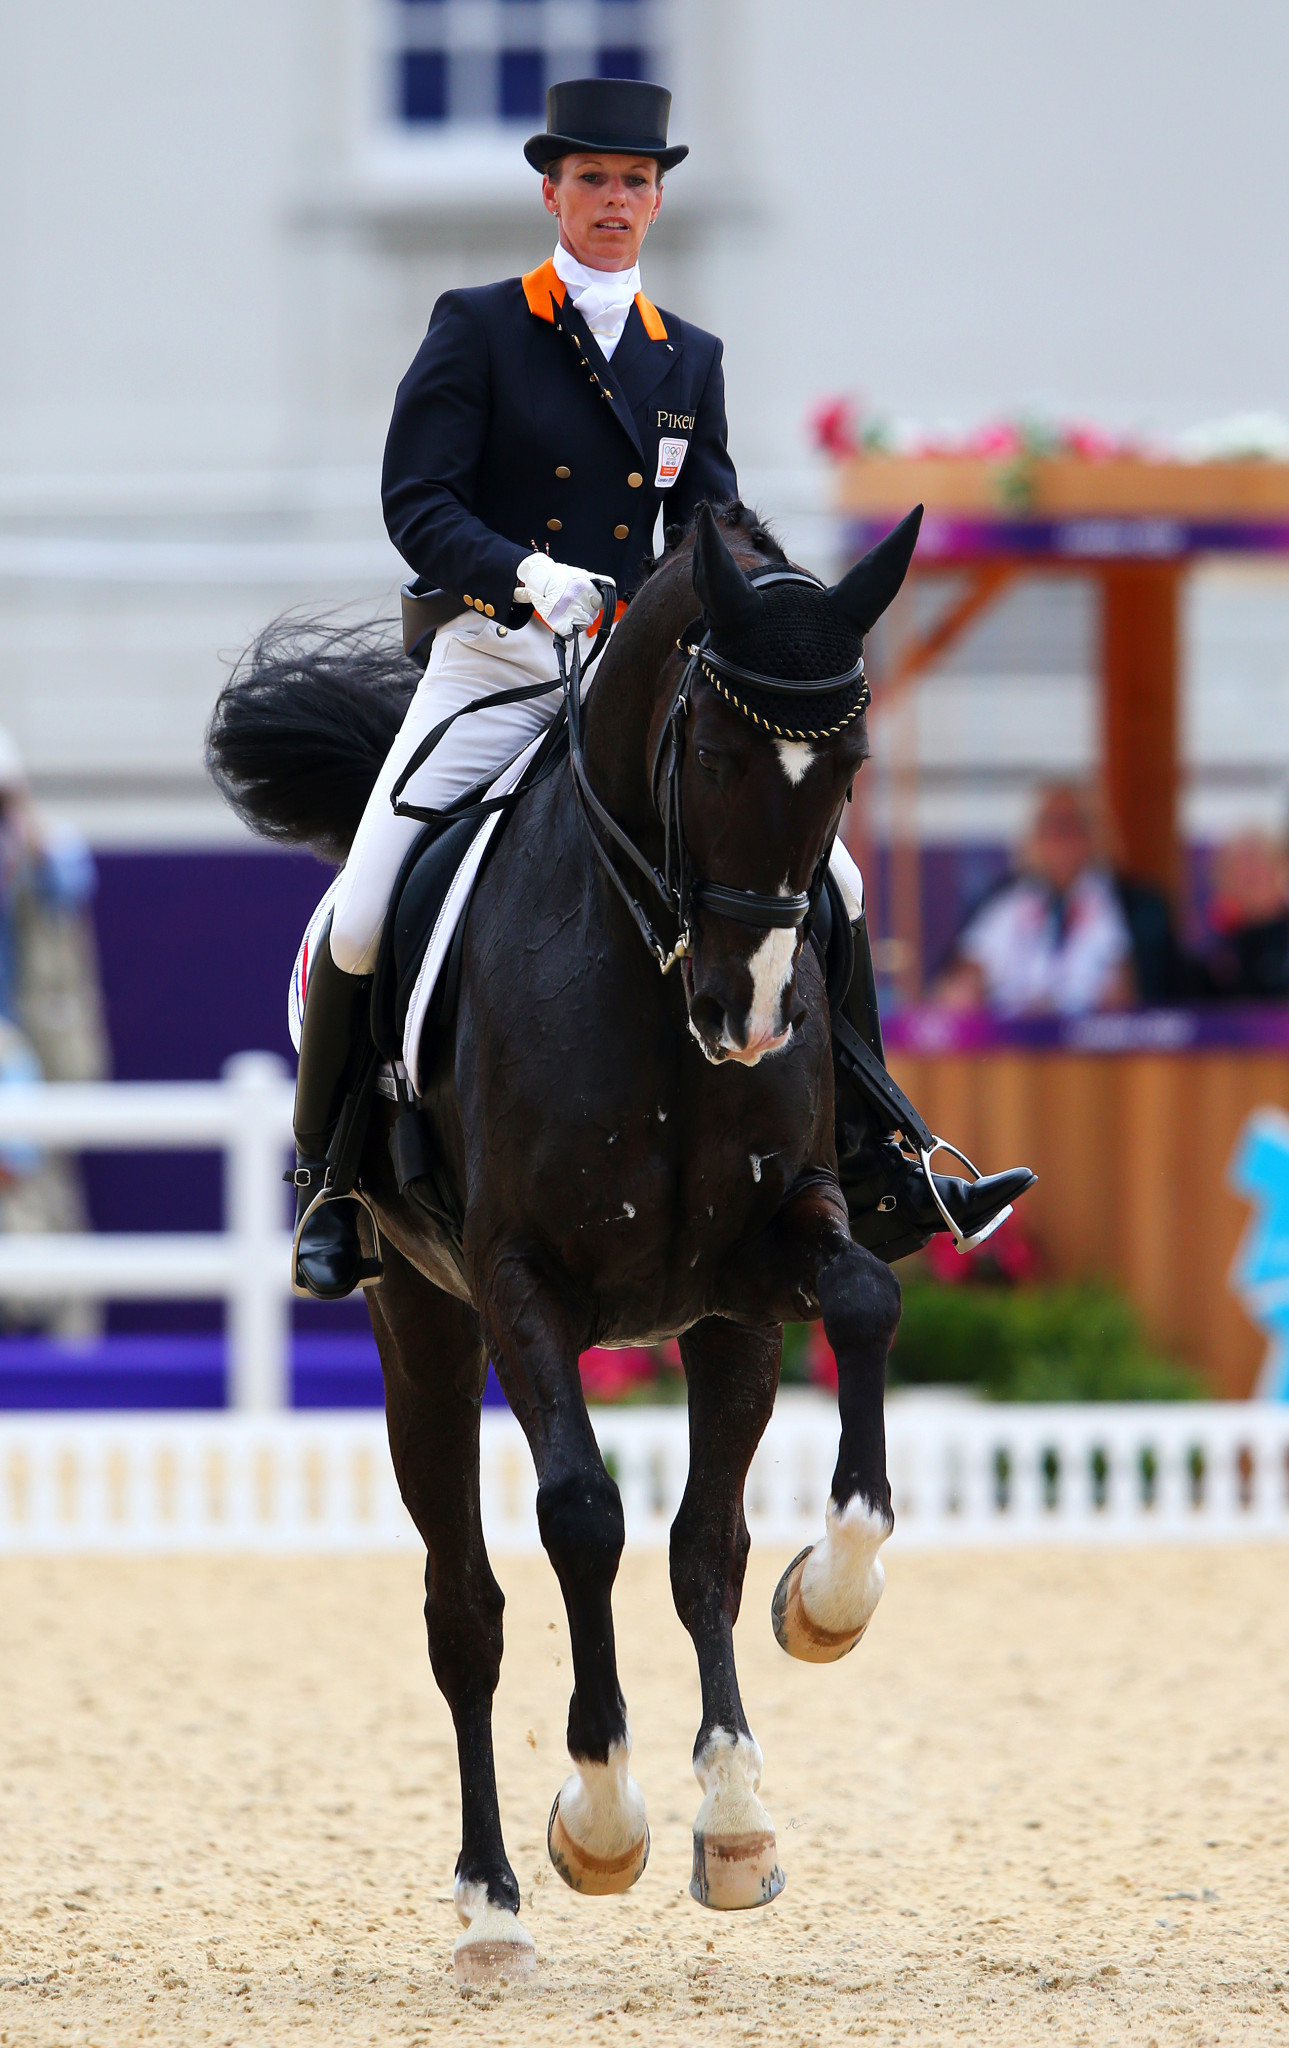 Salinero was retired by Anky van Grunsven shortly after winning his fourth Olympic medal, a bronze at London 2012 ©Getty Images 